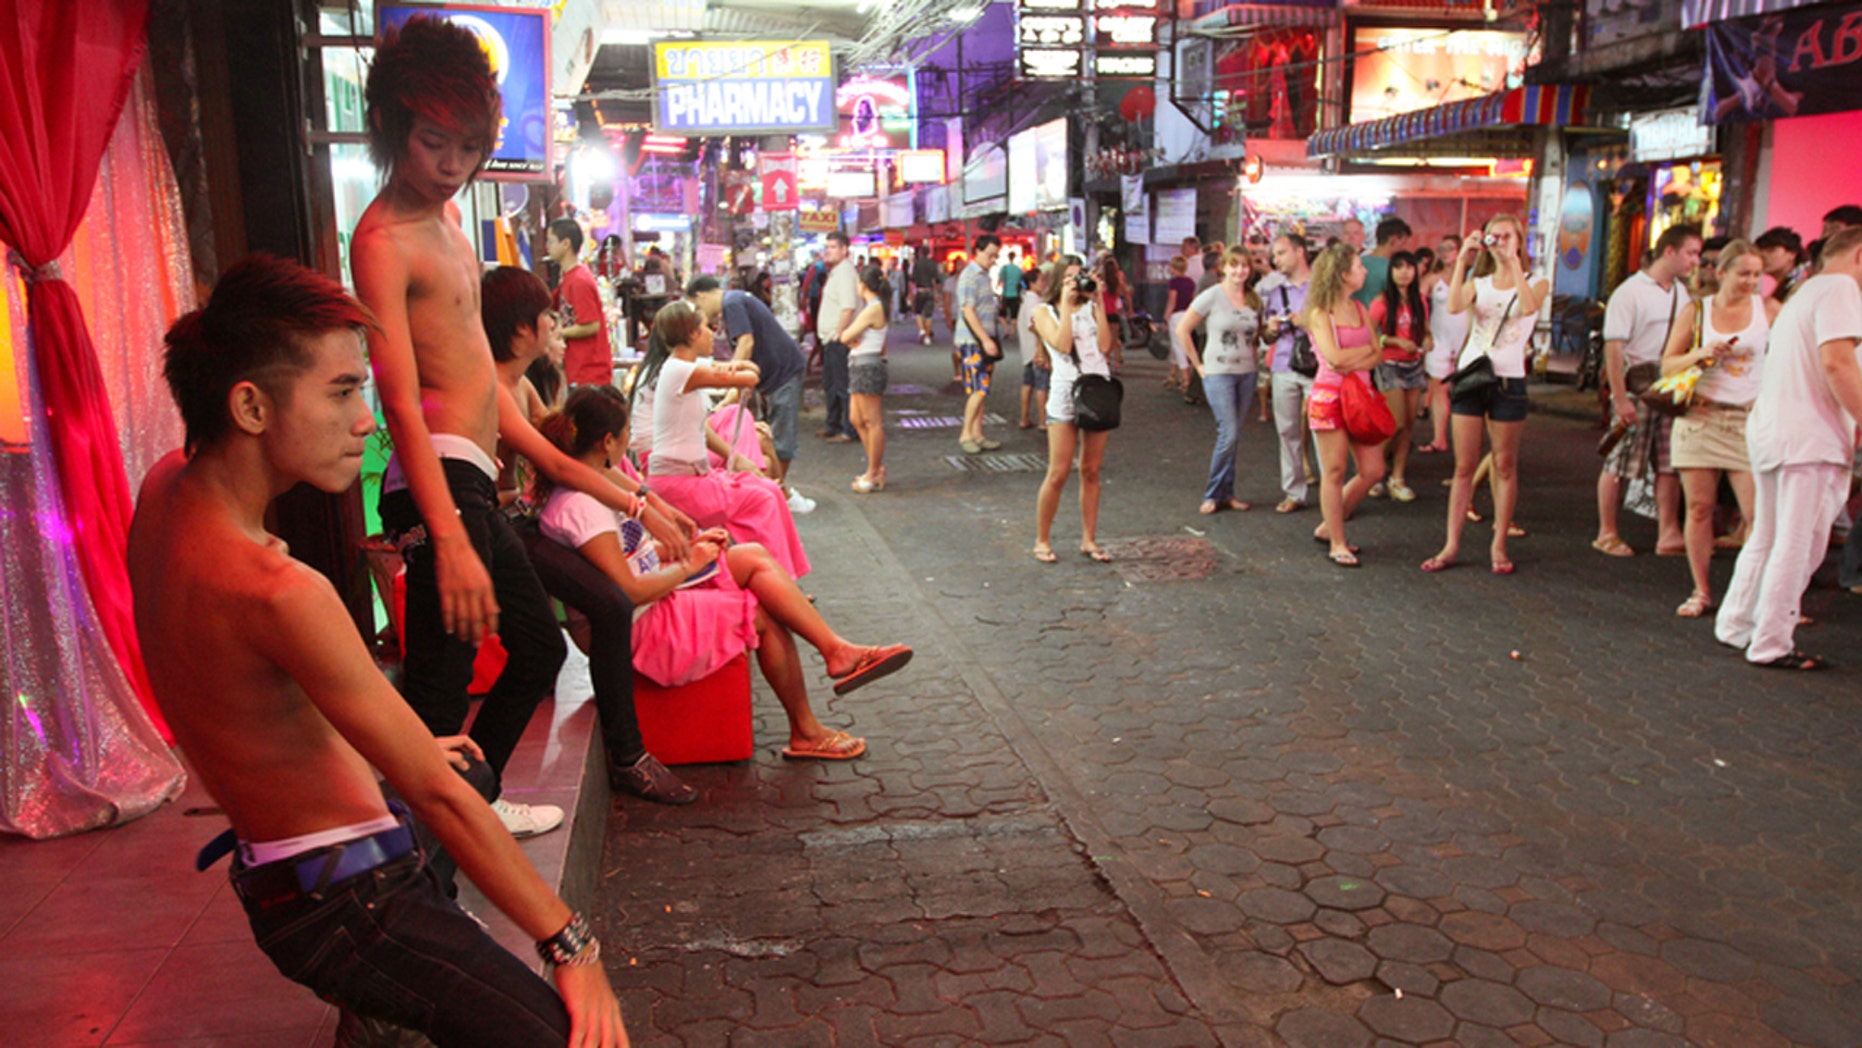 Thailand Tourism Officials Cracking Down On Domestic Sex Industry Fox 6560